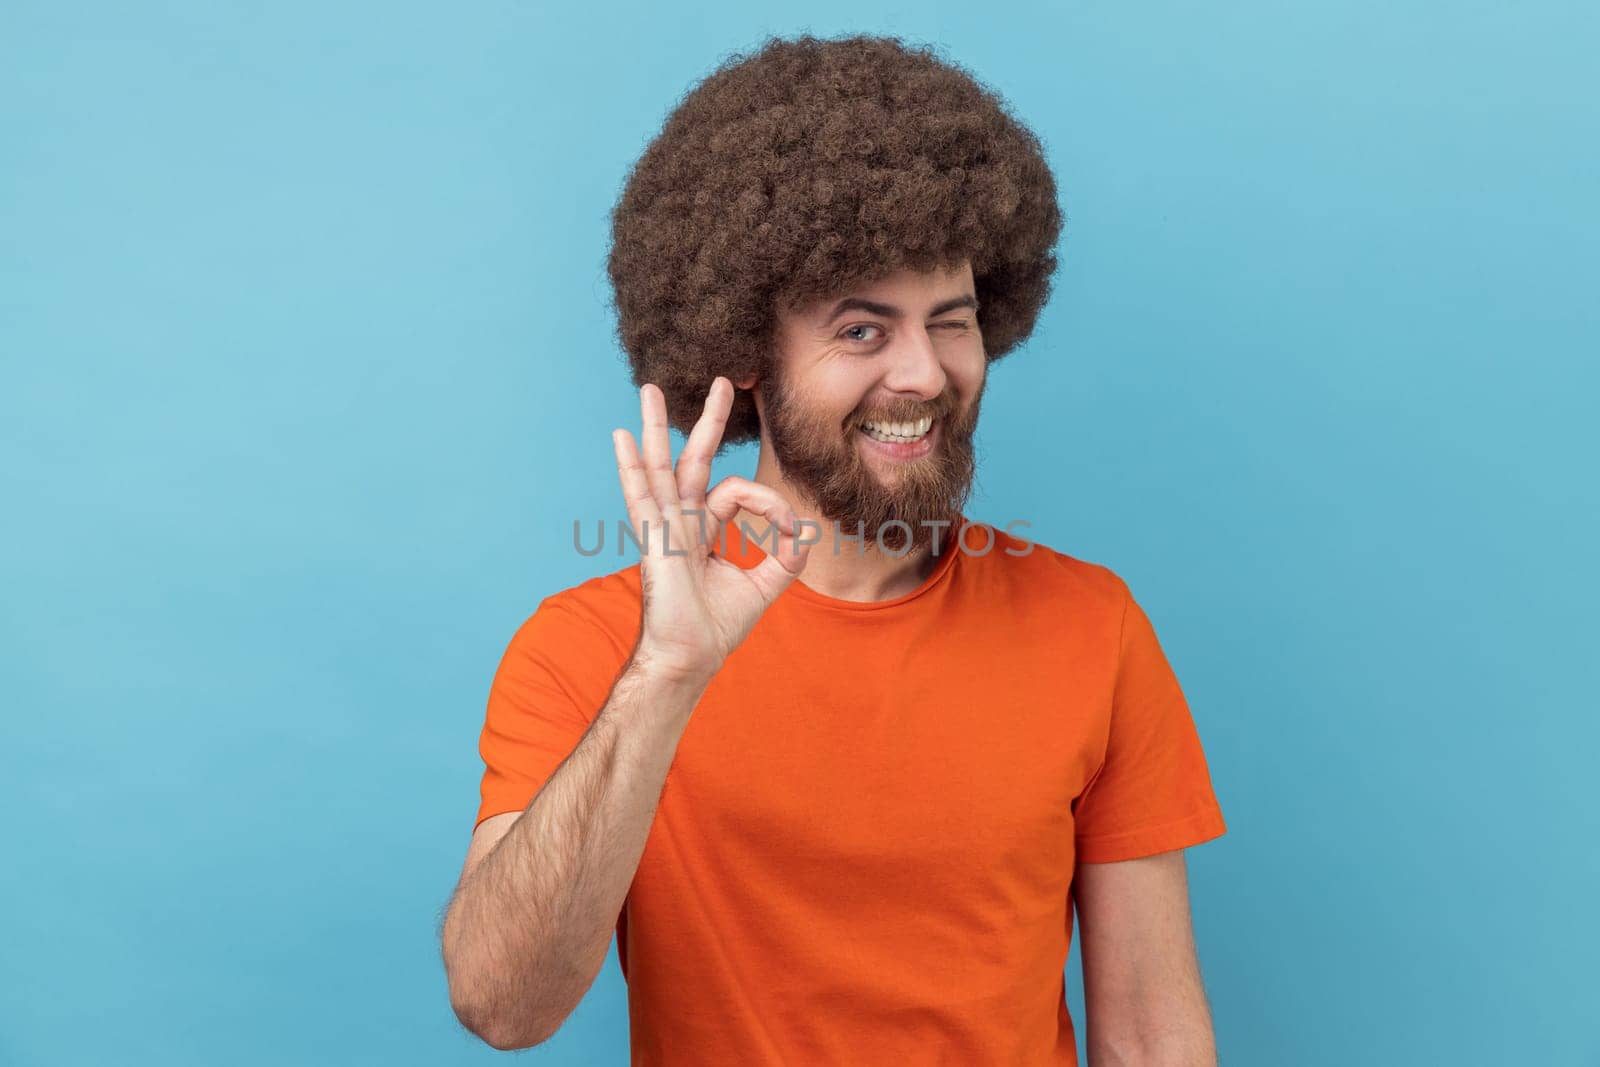 Portrait of positive man with Afro hairstyle wearing orange T-shirt standing and looking at camera with Ok sign, winking and toothy smile. Indoor studio shot isolated on blue background.